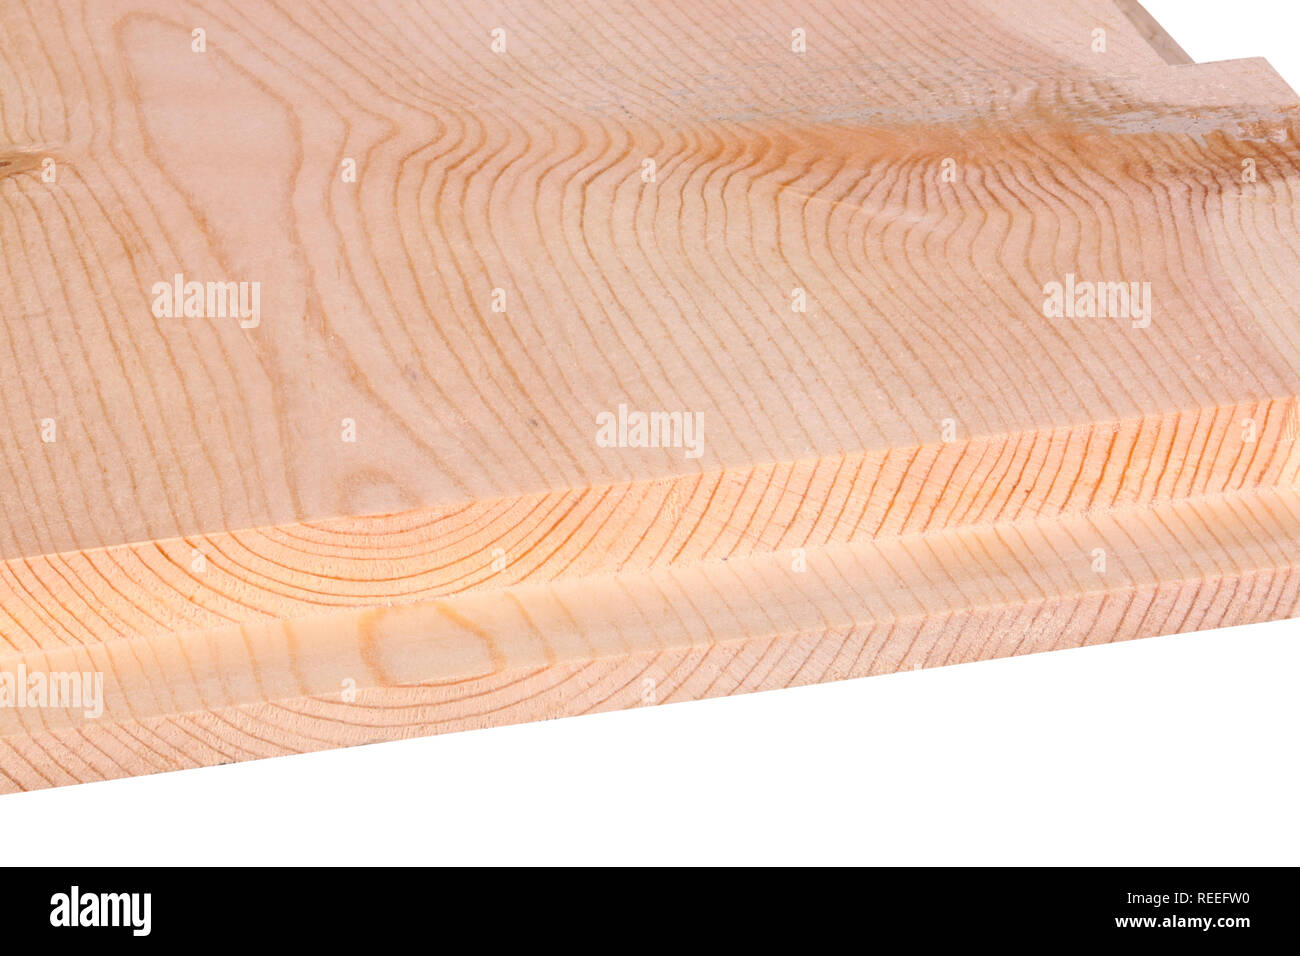 Close-up of a woodworking rabbet or rebate groove isolated against a white background Stock Photo